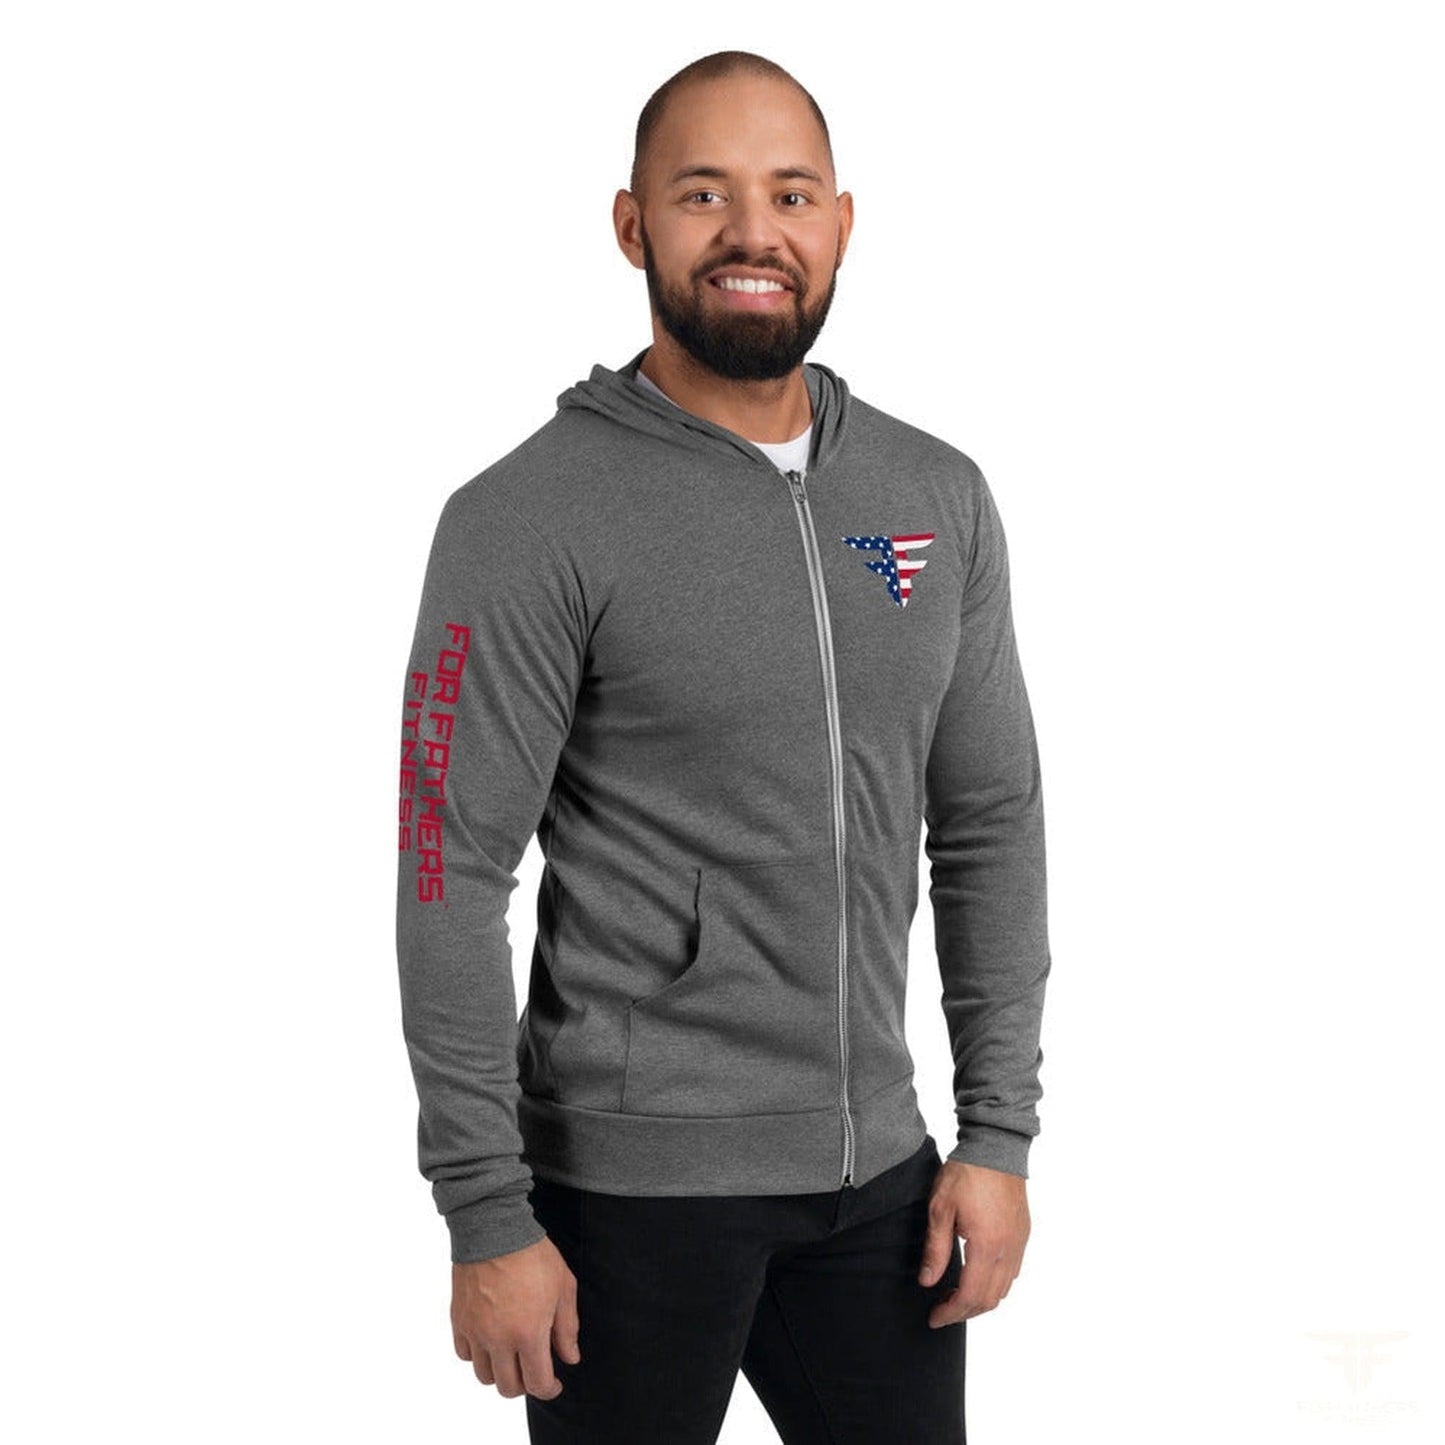 Zip Hoodie Patriot - For Fathers Fitness